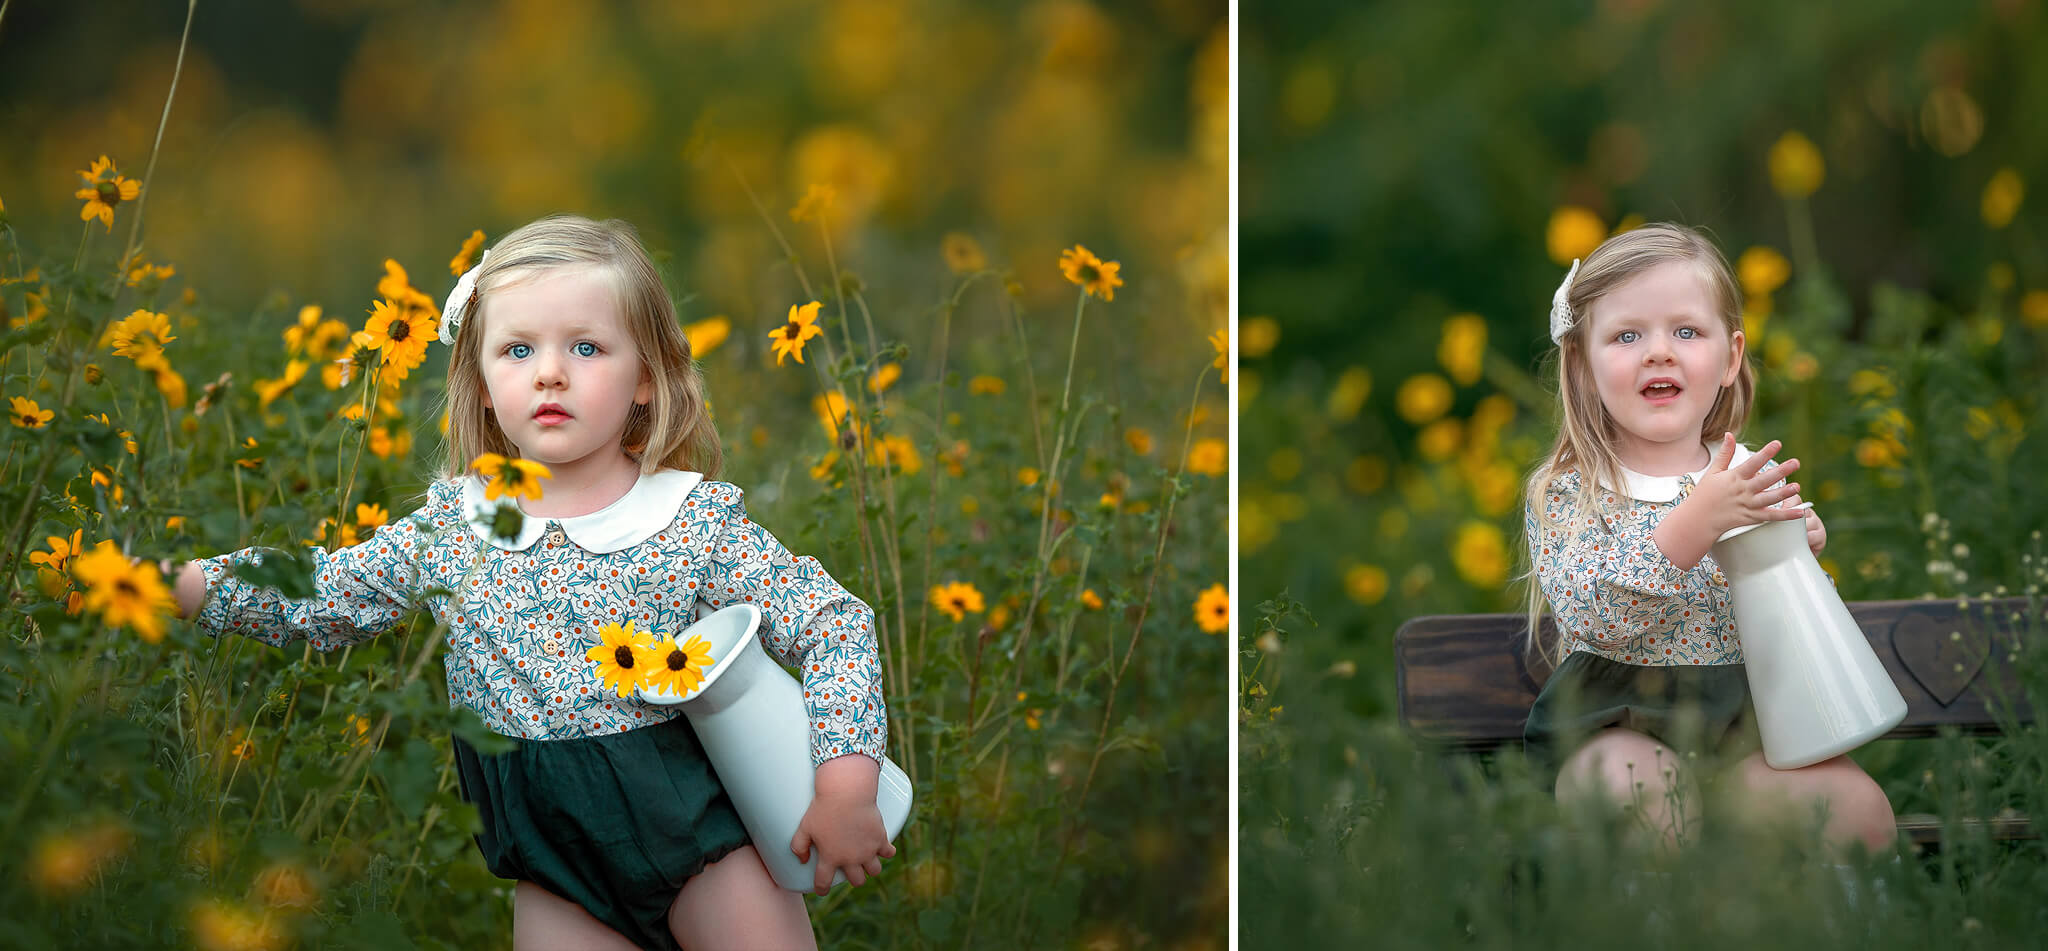 4 year old girl in a beautiful Perth location with yellow flowers during photoshoot